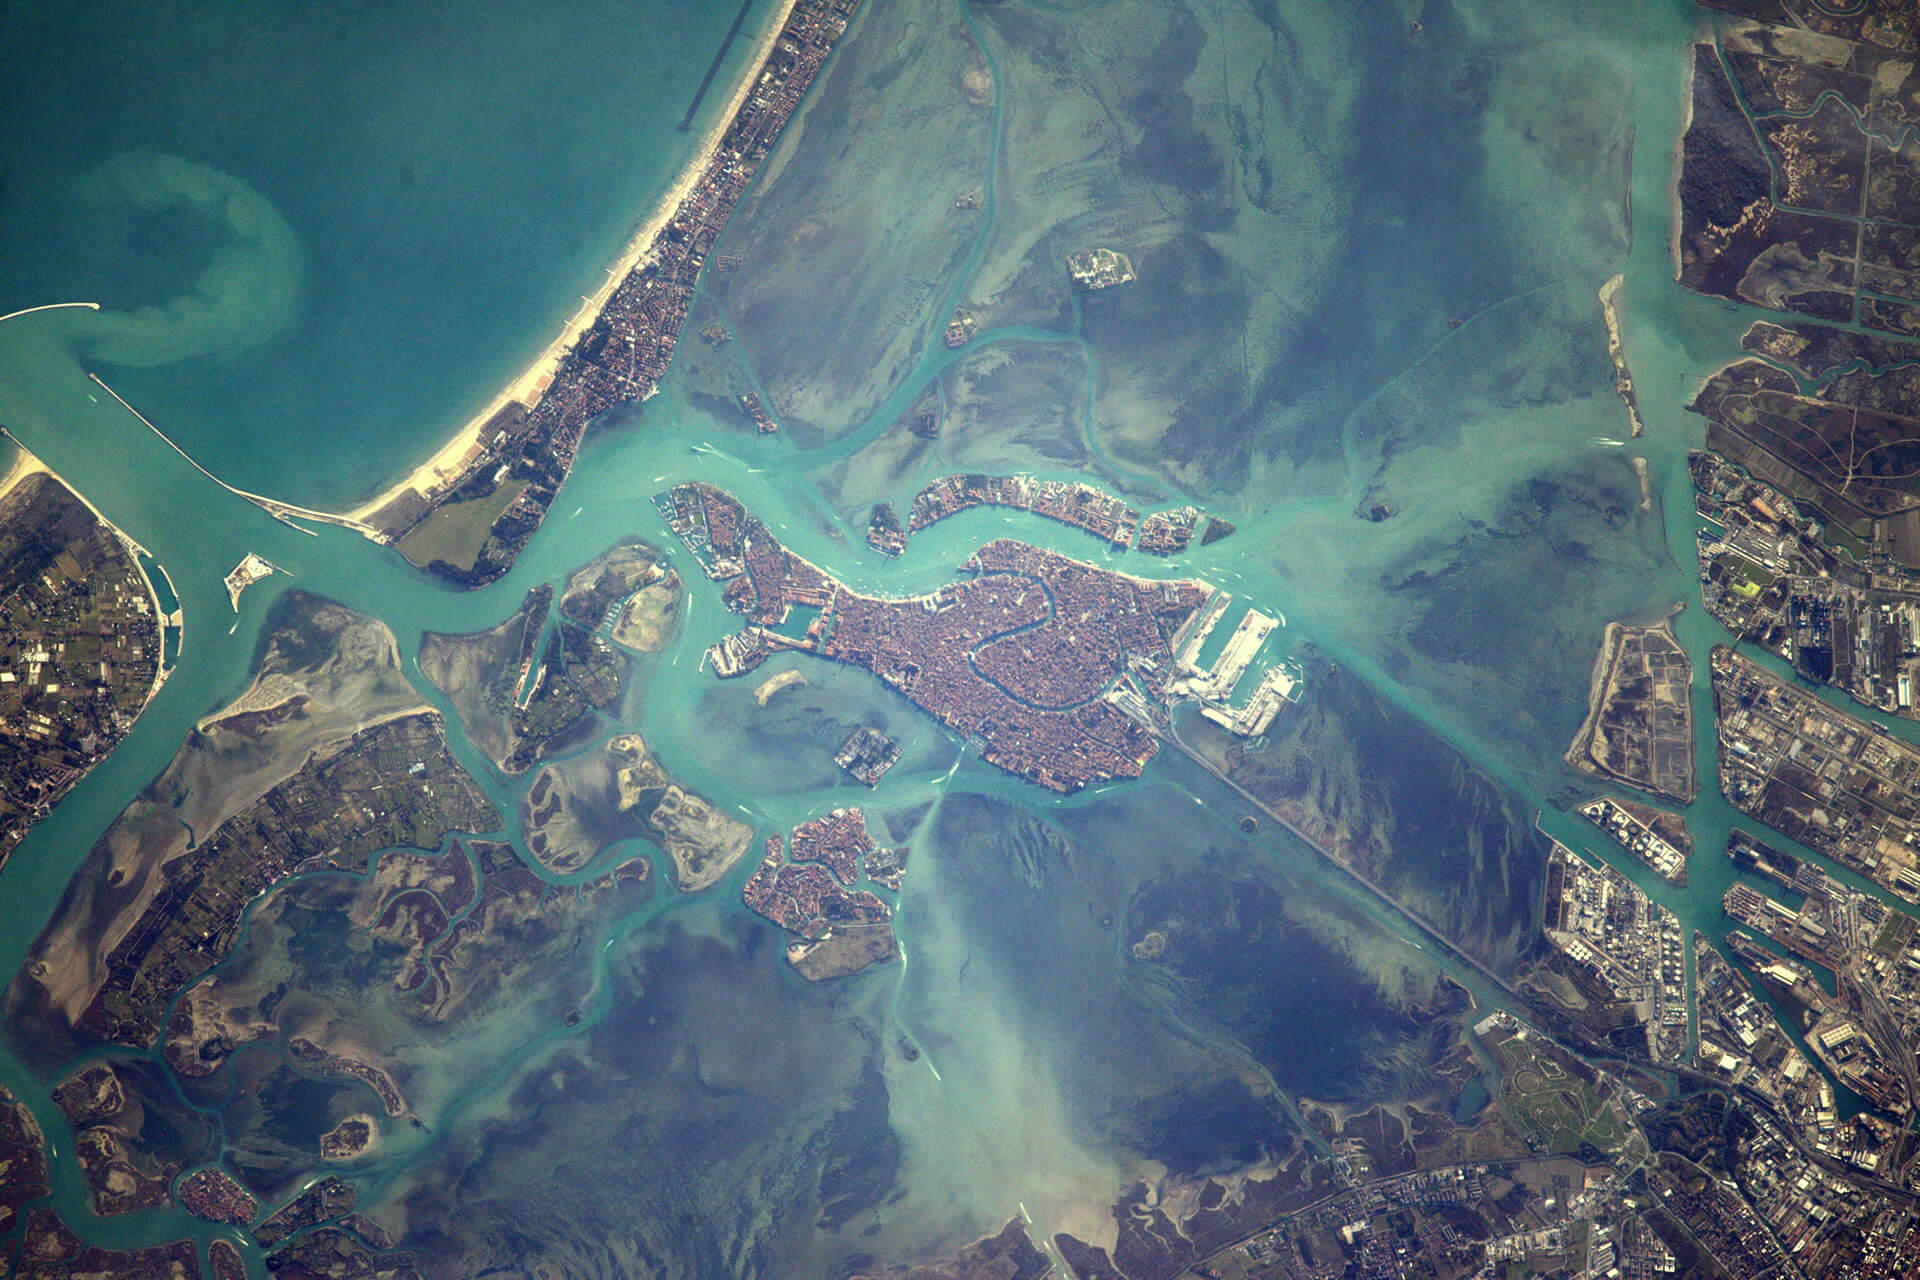 Venice viewed from the International Space Station